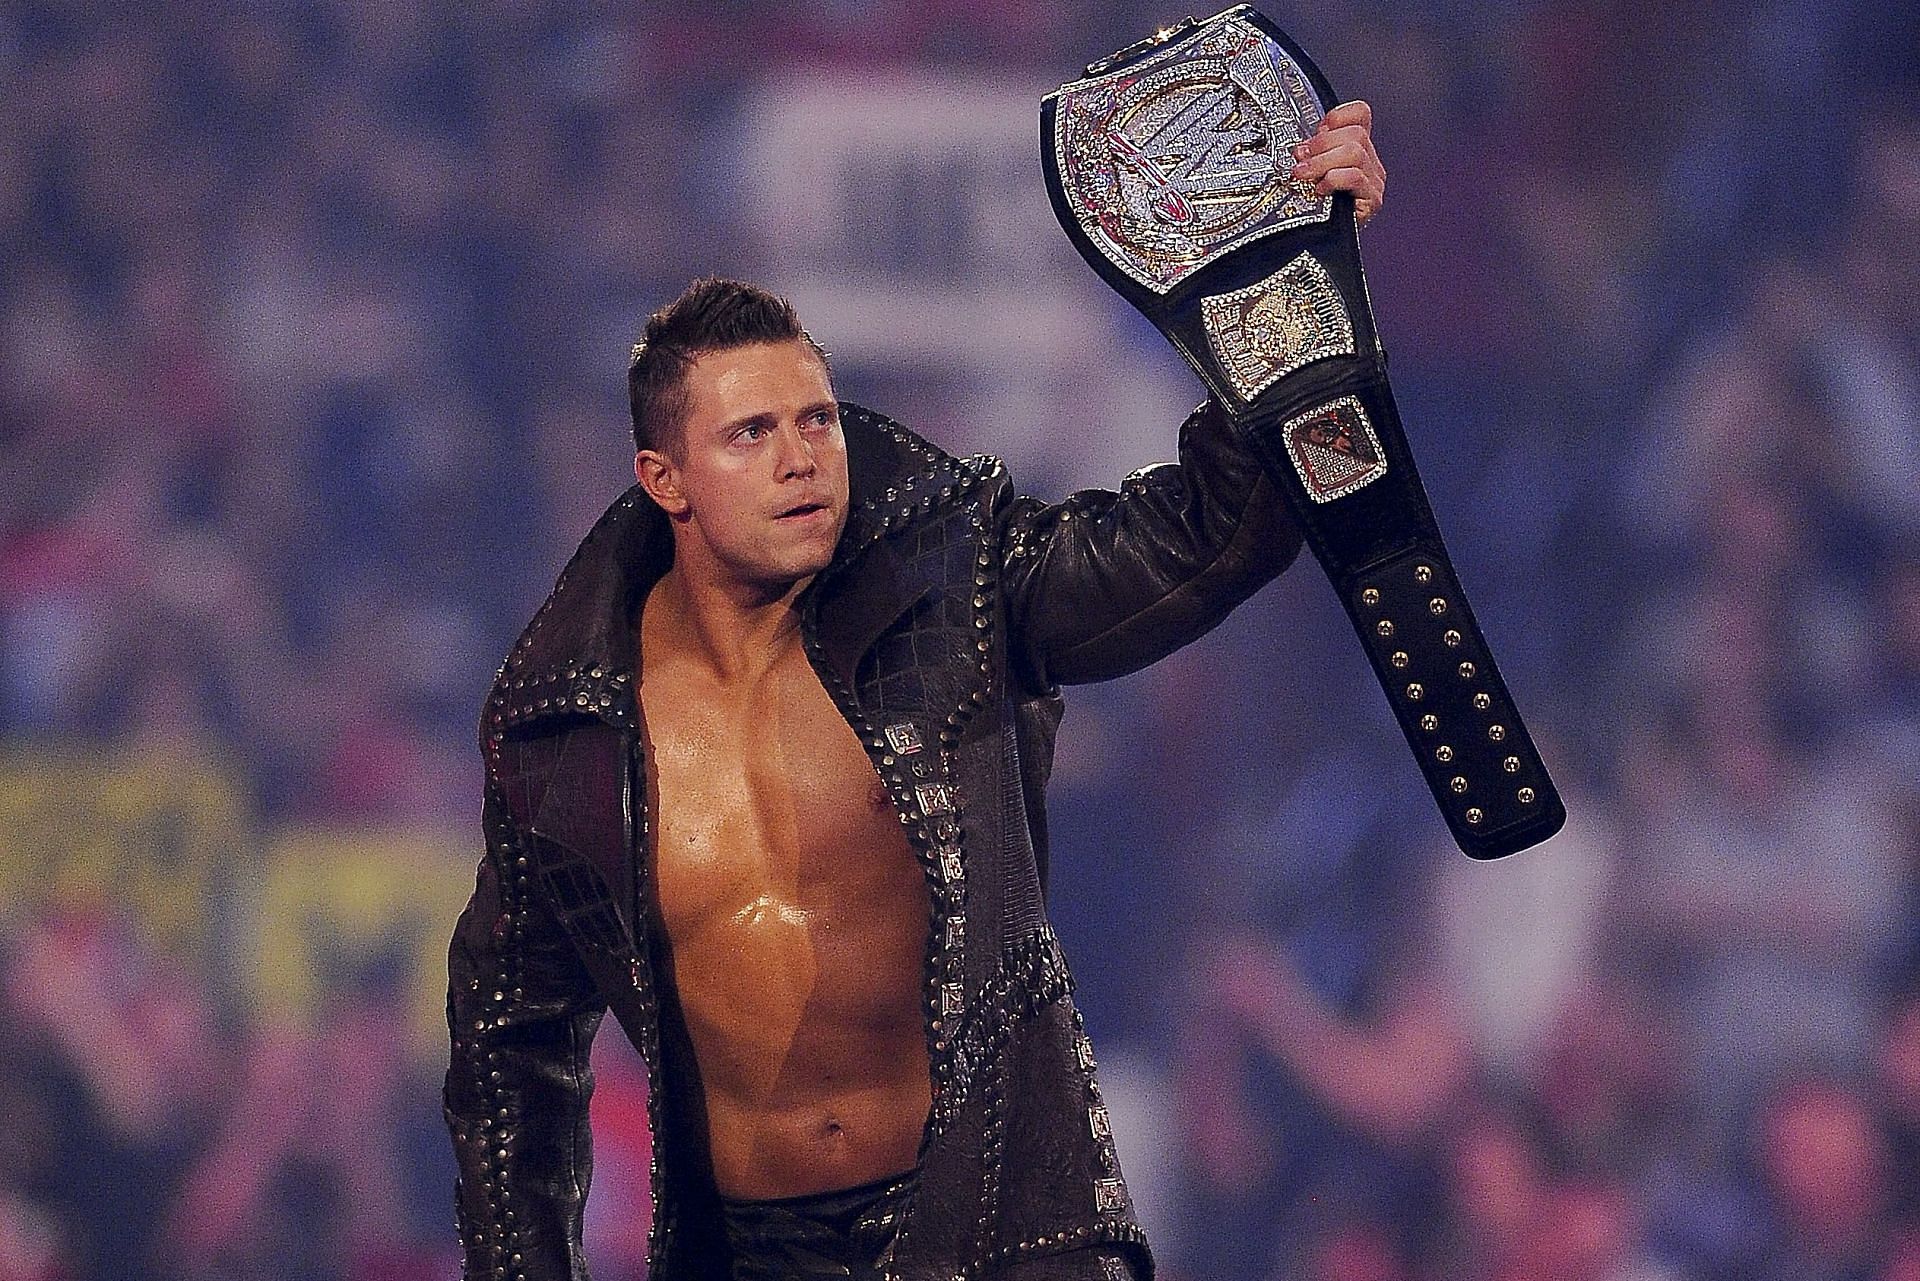 He&#039;s The Miz, and he&#039;s AWESOME!